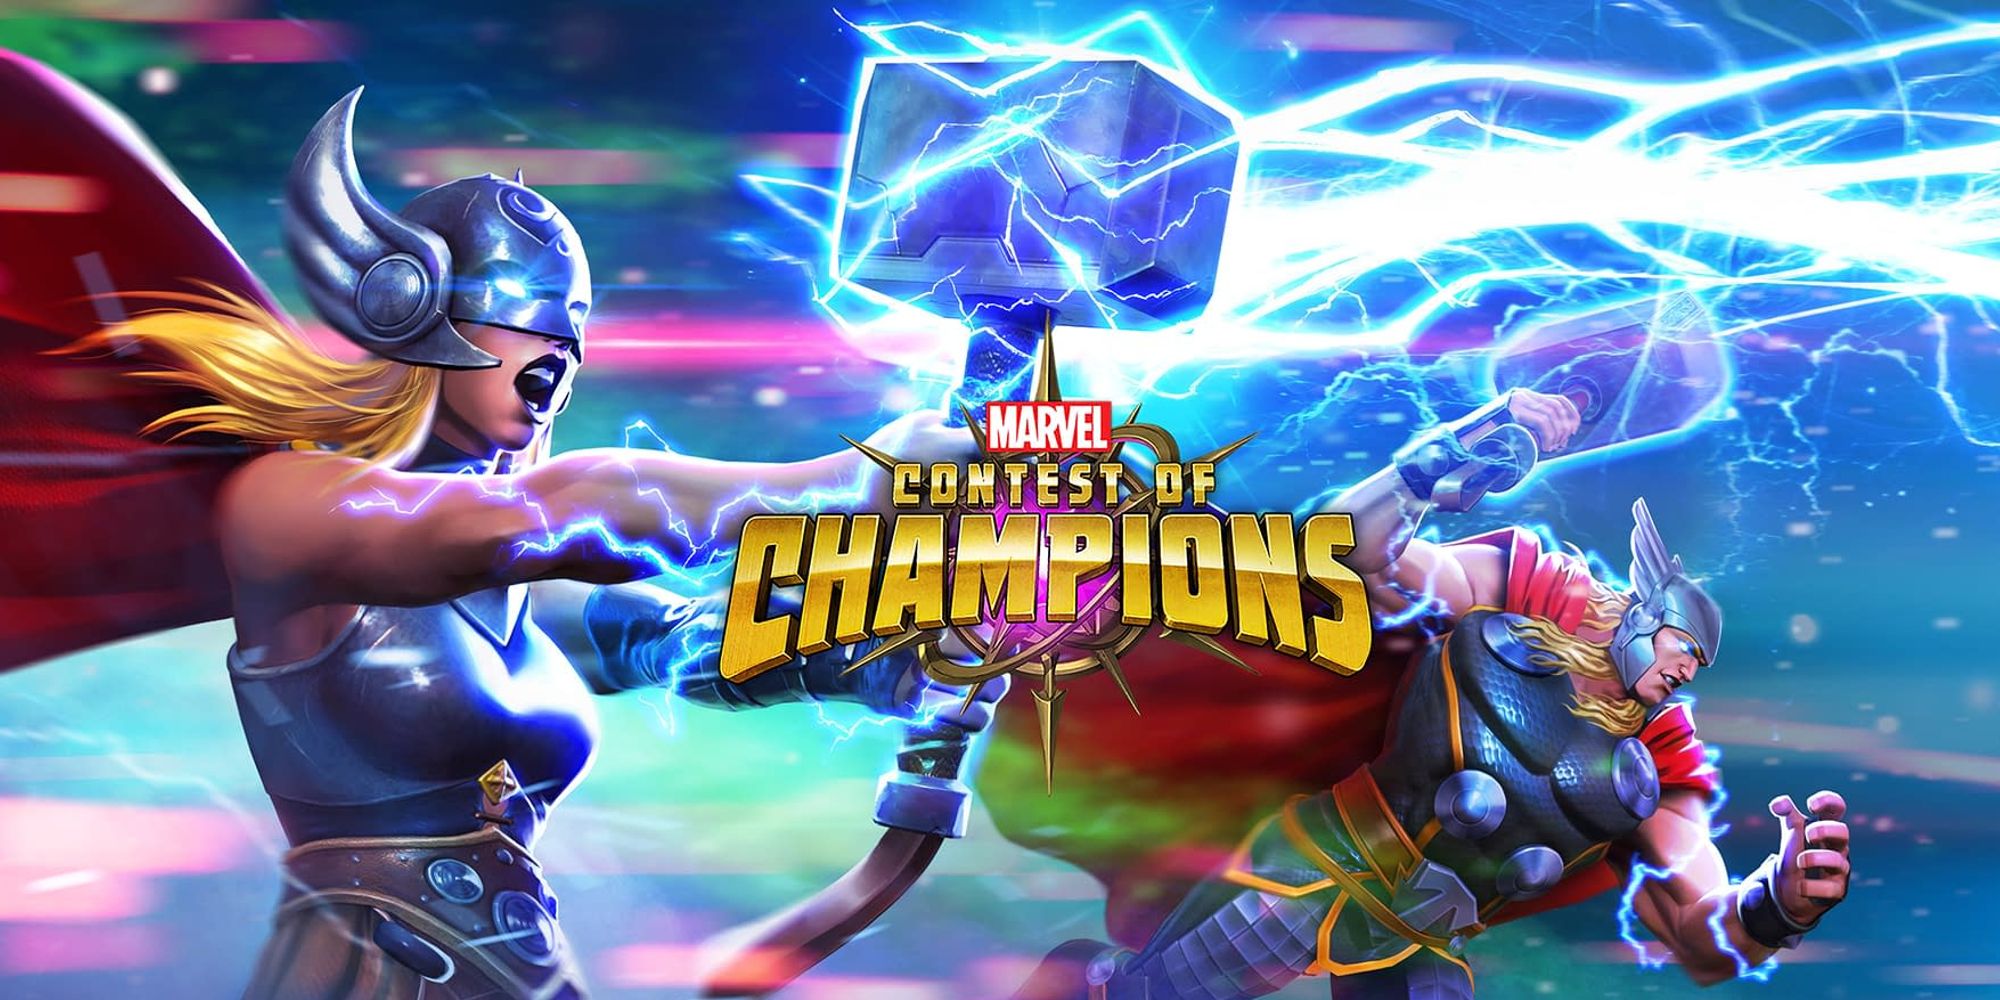 Thor Odinson and Jane Foster The Mighty Thor in Marvel Contest Of Champions